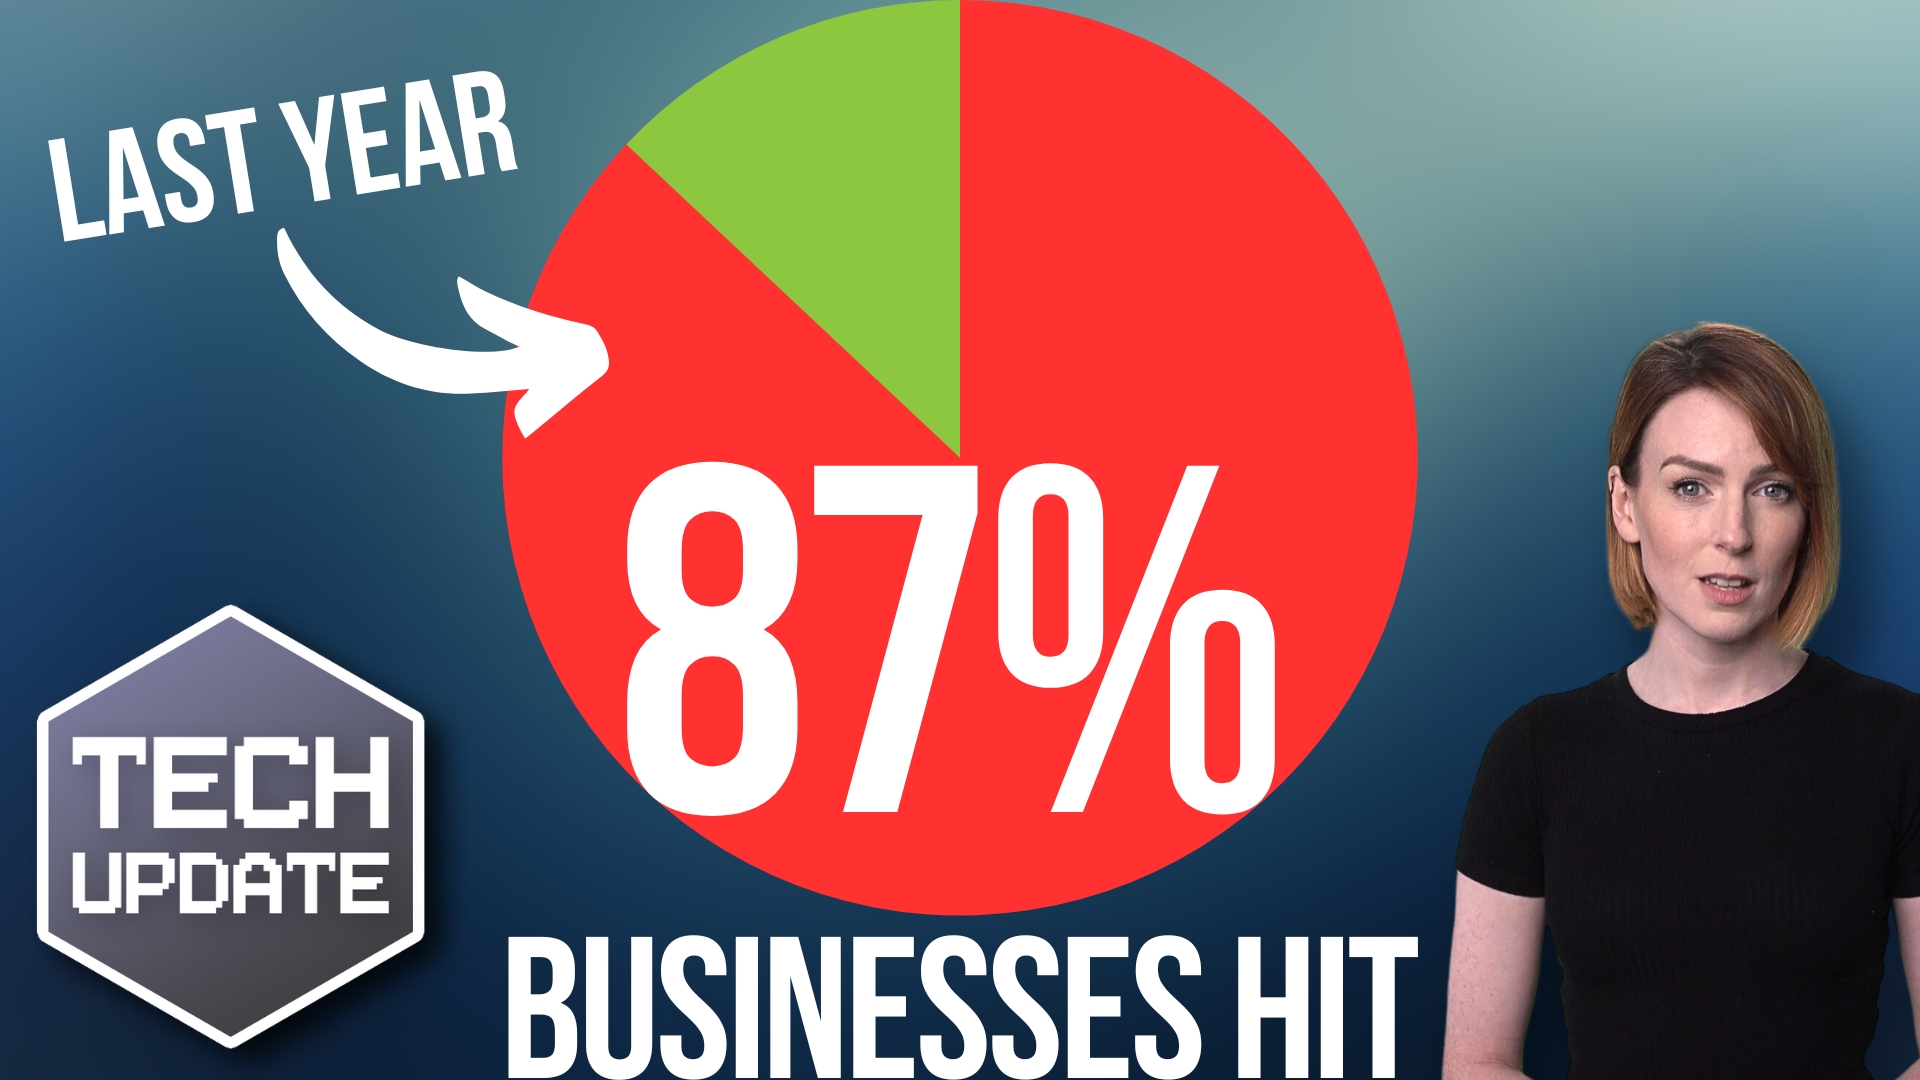 Scary stat: 87% of businesses hit by this in the last year